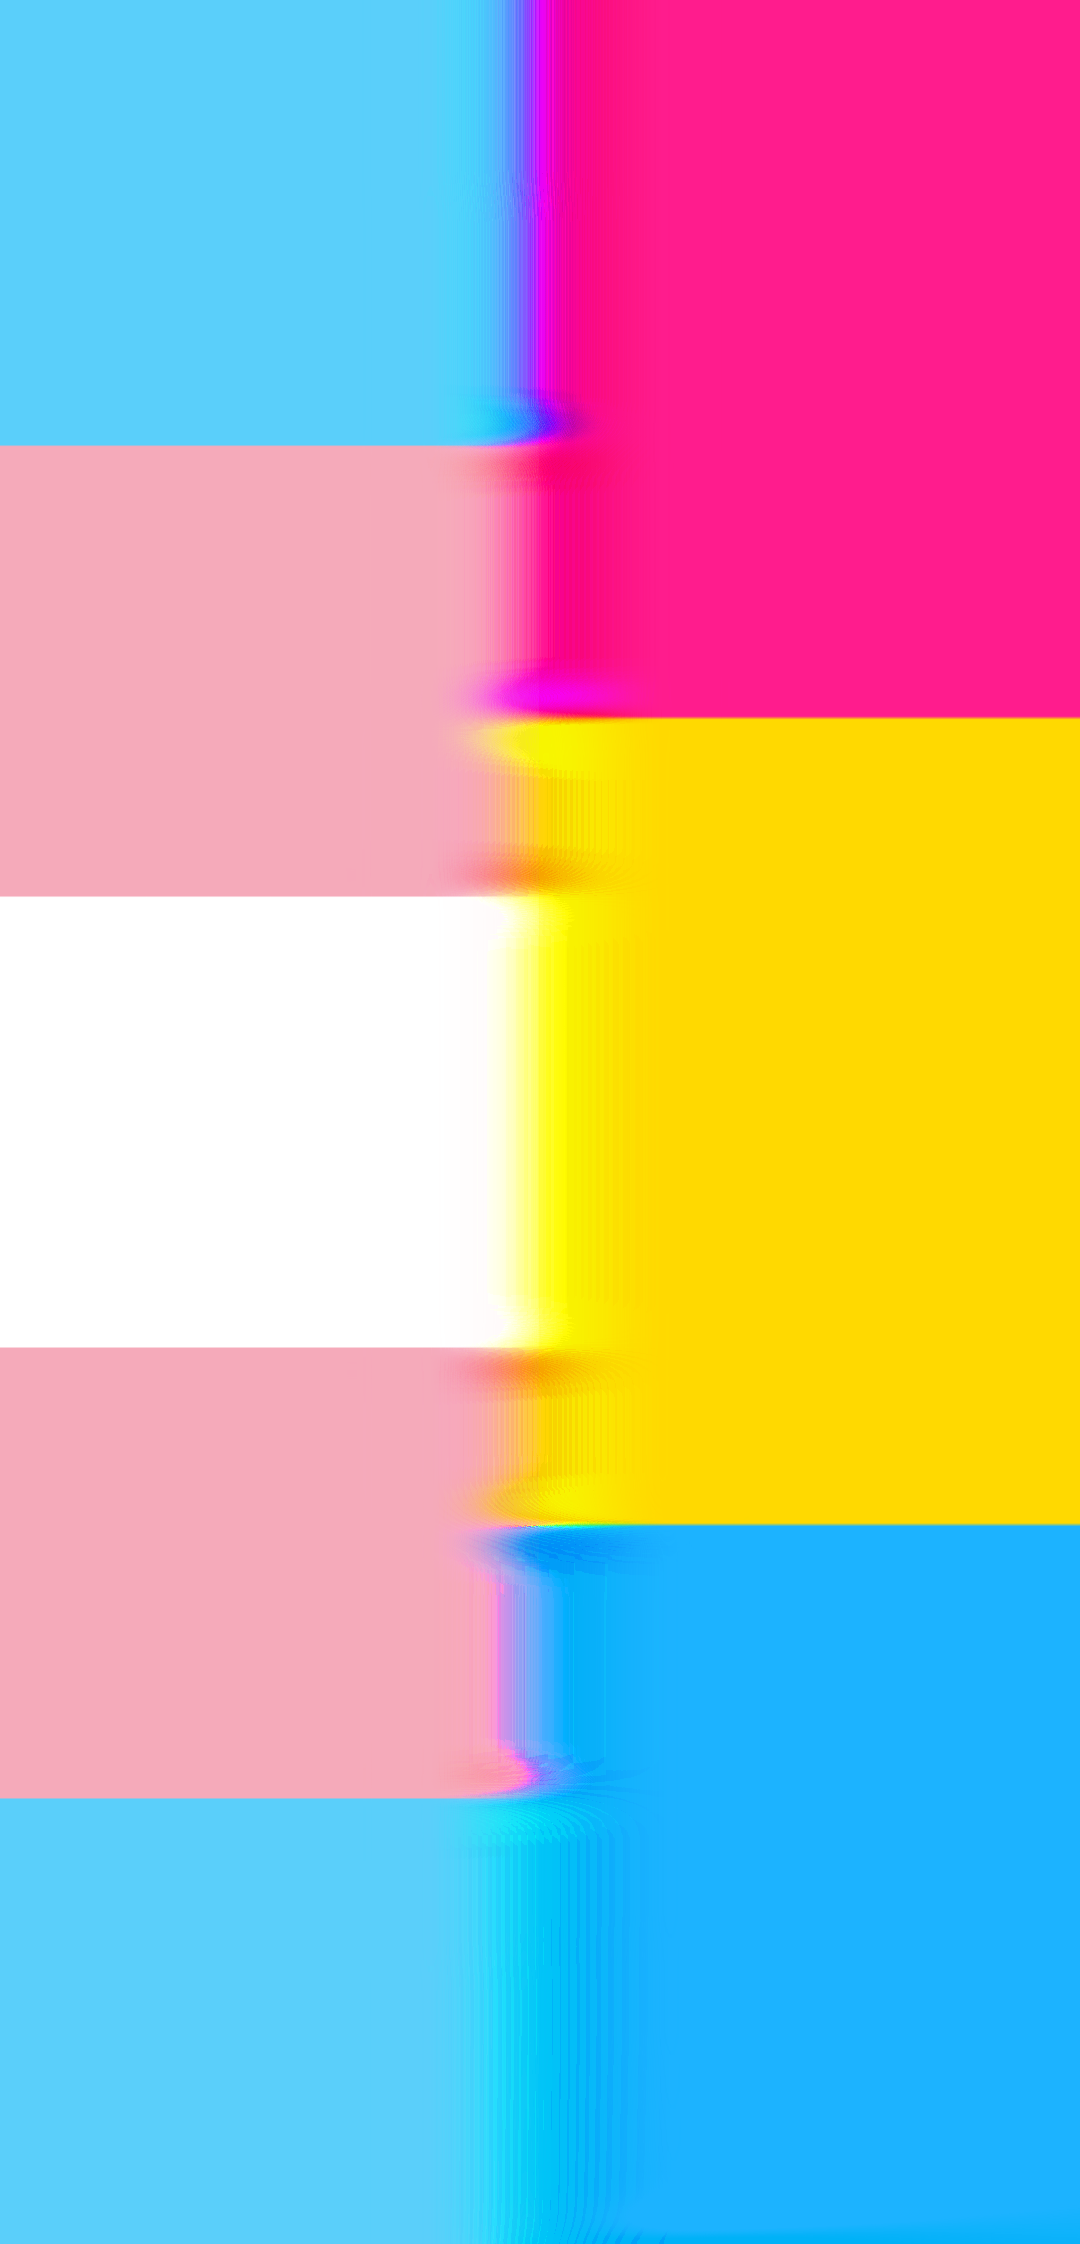 I Made A Transgender Pansexual Wallpaper If Anyone Wants To Use It <3